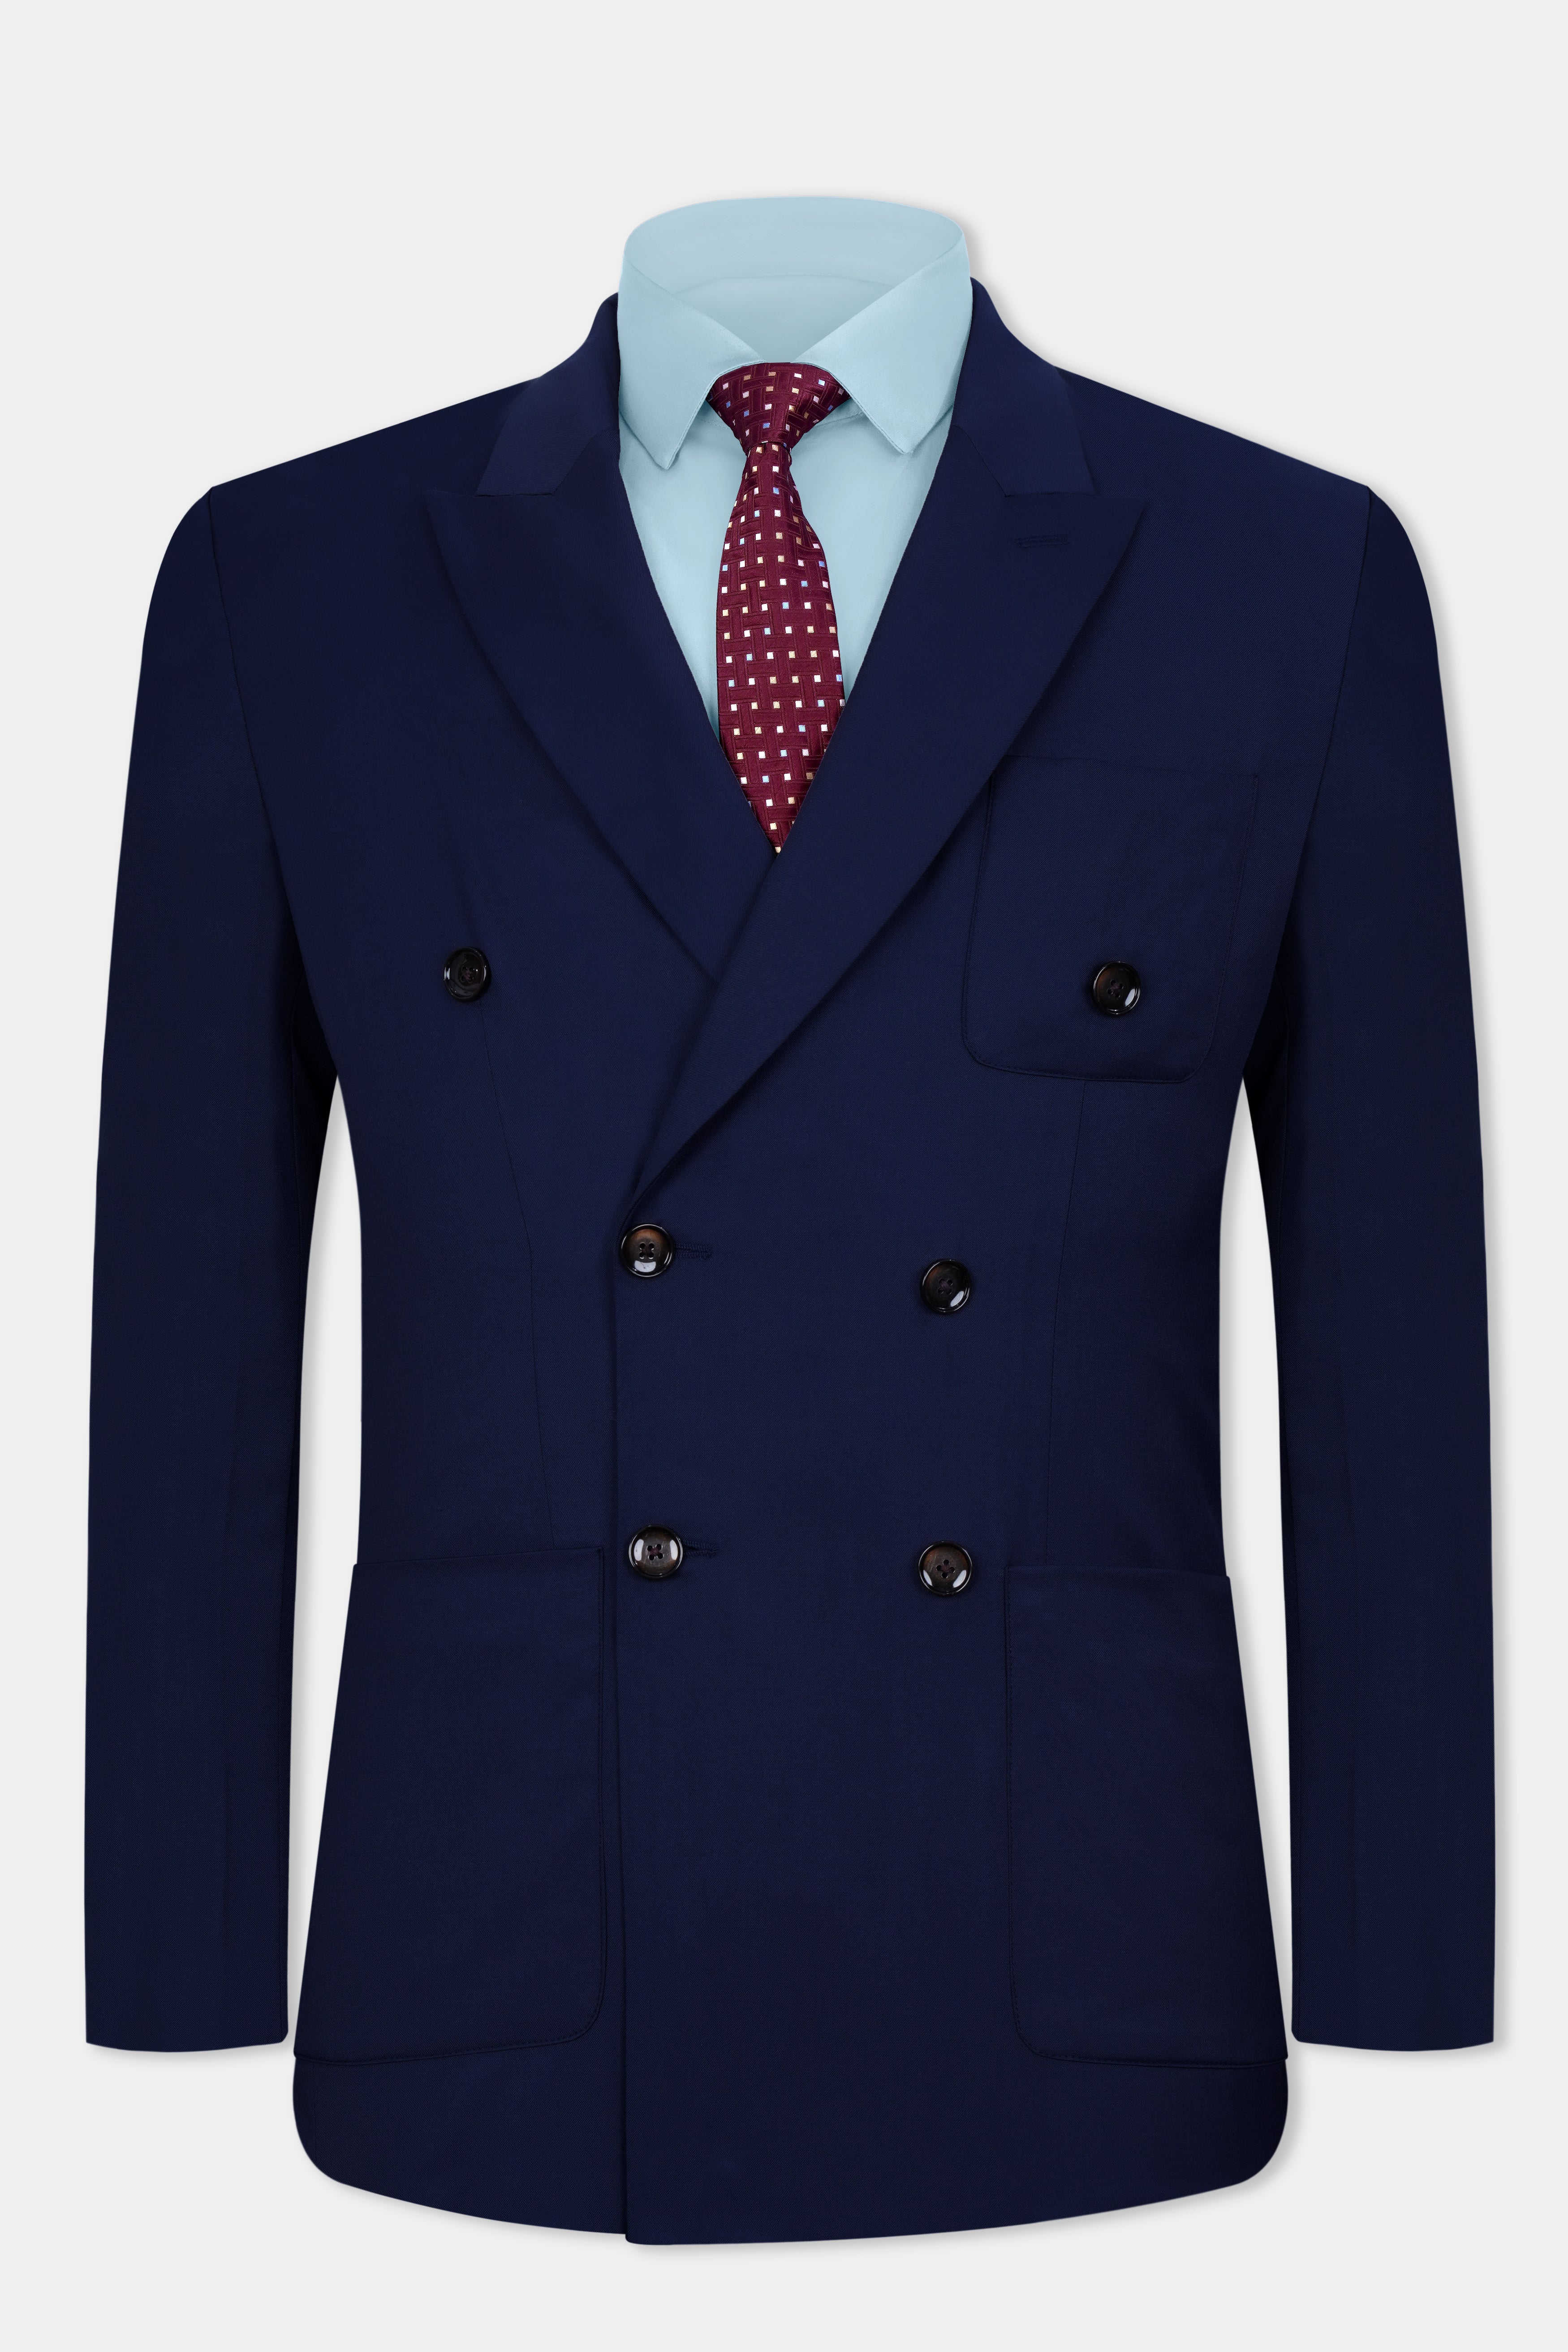 Cinder Blue Wool Rich Double Breasted Sports Blazer BL3077-DB-PP-36, BL3077-DB-PP-38, BL3077-DB-PP-40, BL3077-DB-PP-42, BL3077-DB-PP-44, BL3077-DB-PP-46, BL3077-DB-PP-48, BL3077-DB-PP-50, BL3077-DB-PP-52, BL3077-DB-PP-54, BL3077-DB-PP-56, BL3077-DB-PP-58, BL3077-DB-PP-60